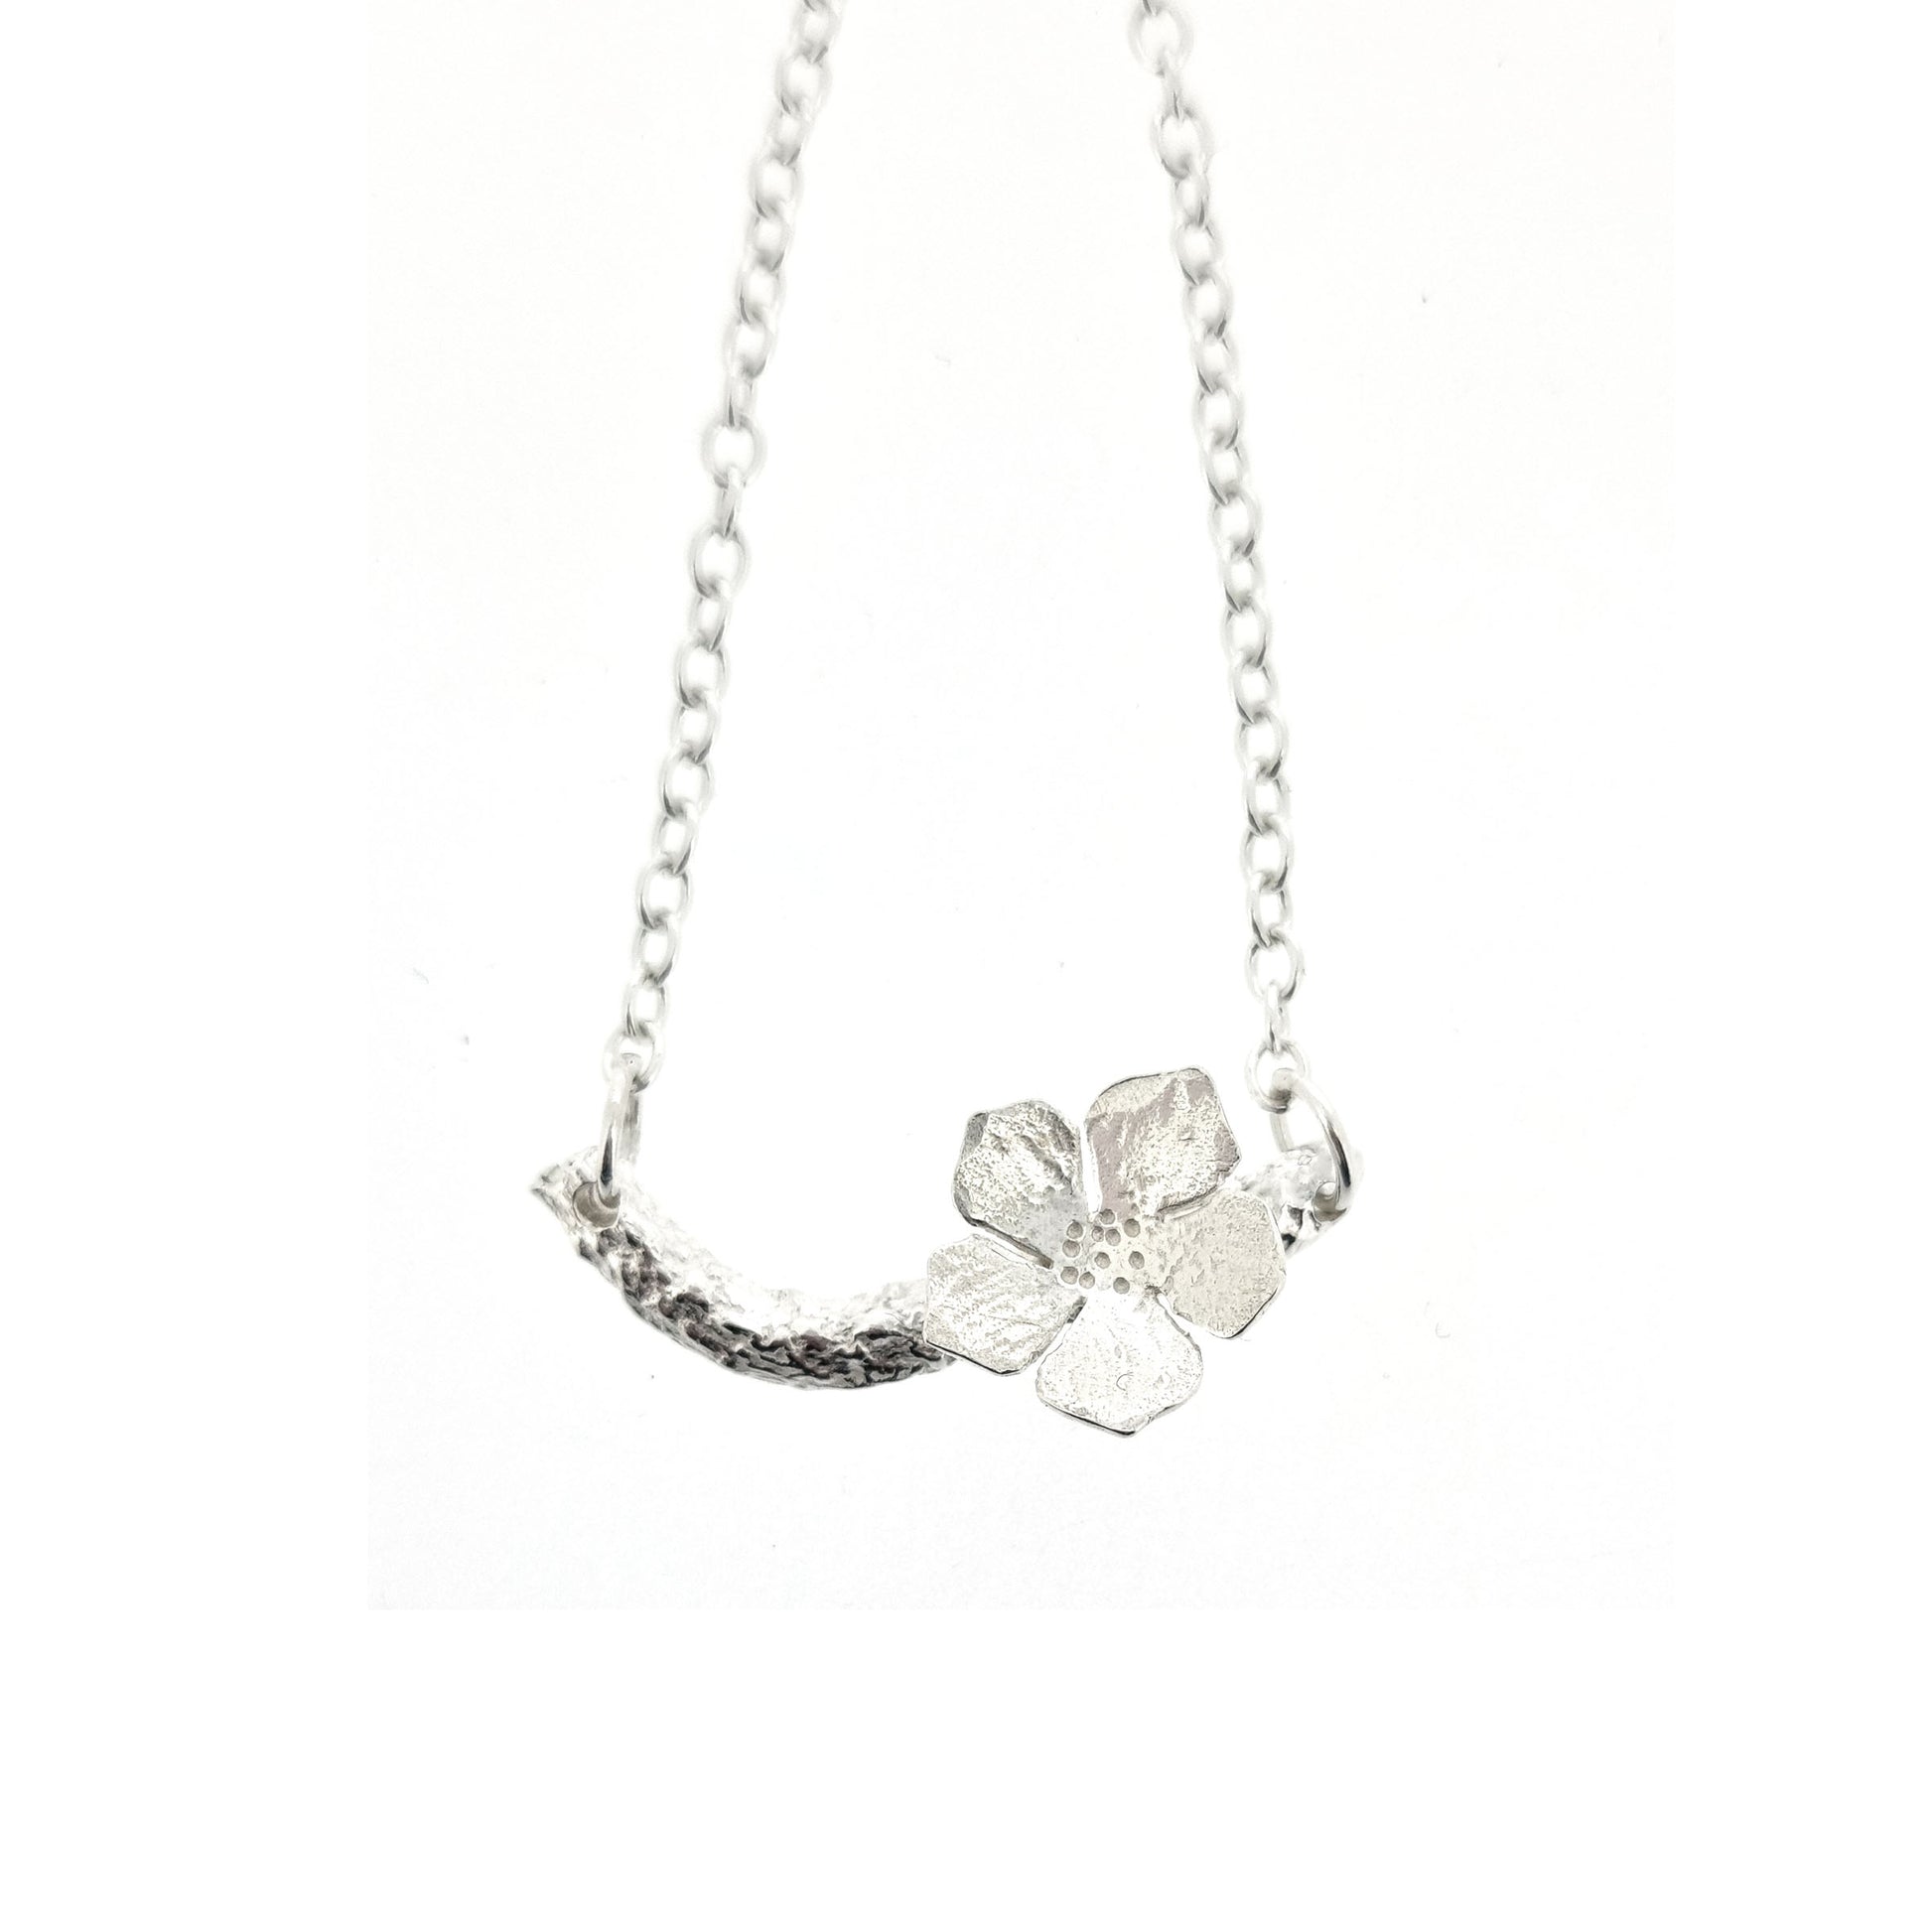 Silver necklace with small branch and a single 5 petal flower on it.